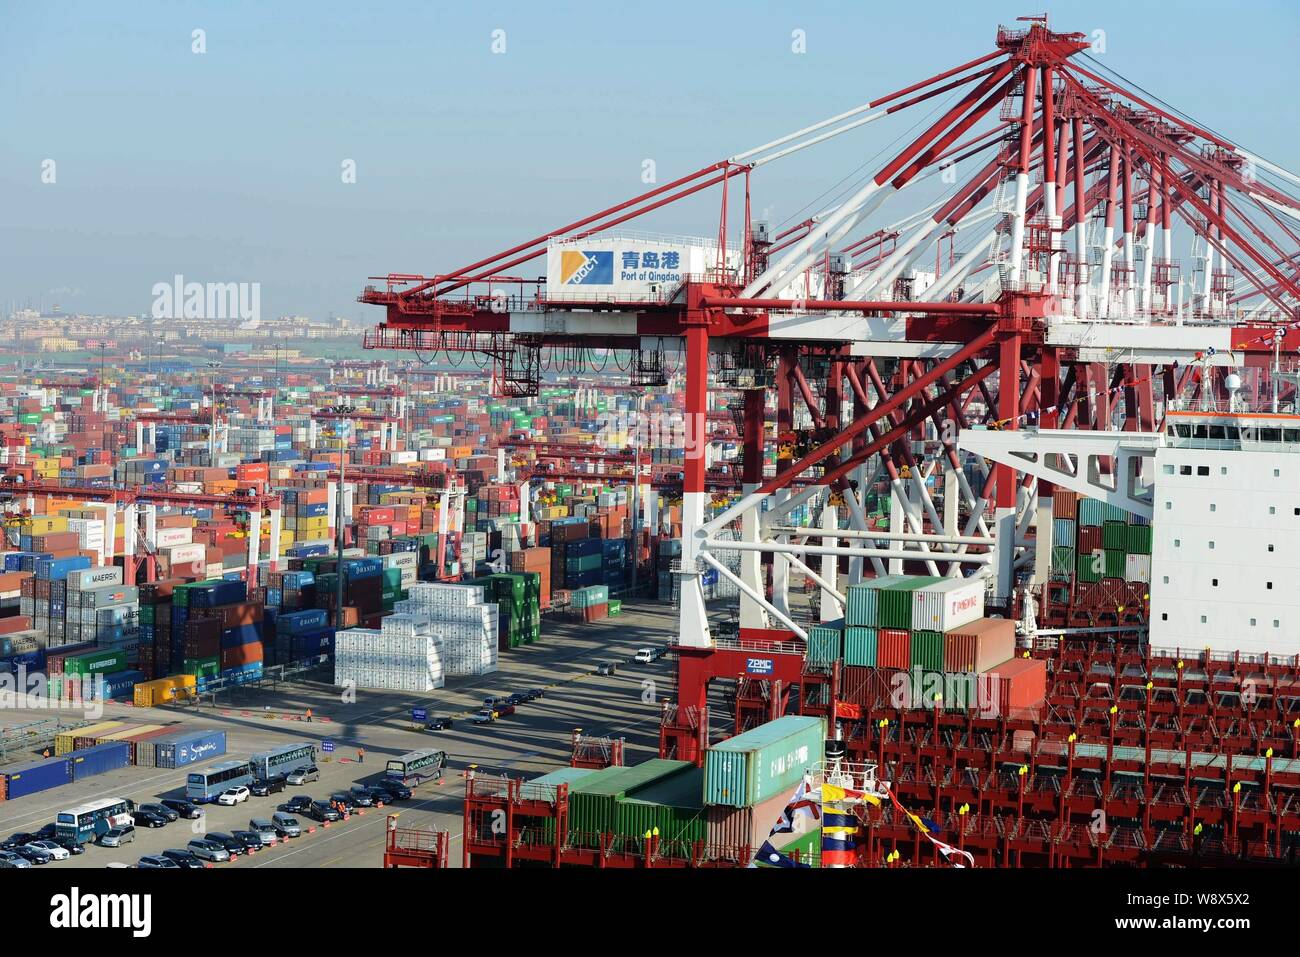 Stacks of Containers are seen at the Port of Qingdao in Qingdao city, east China's Shandong province, 8 December 2014.   China's imports shrank unexpe Stock Photo